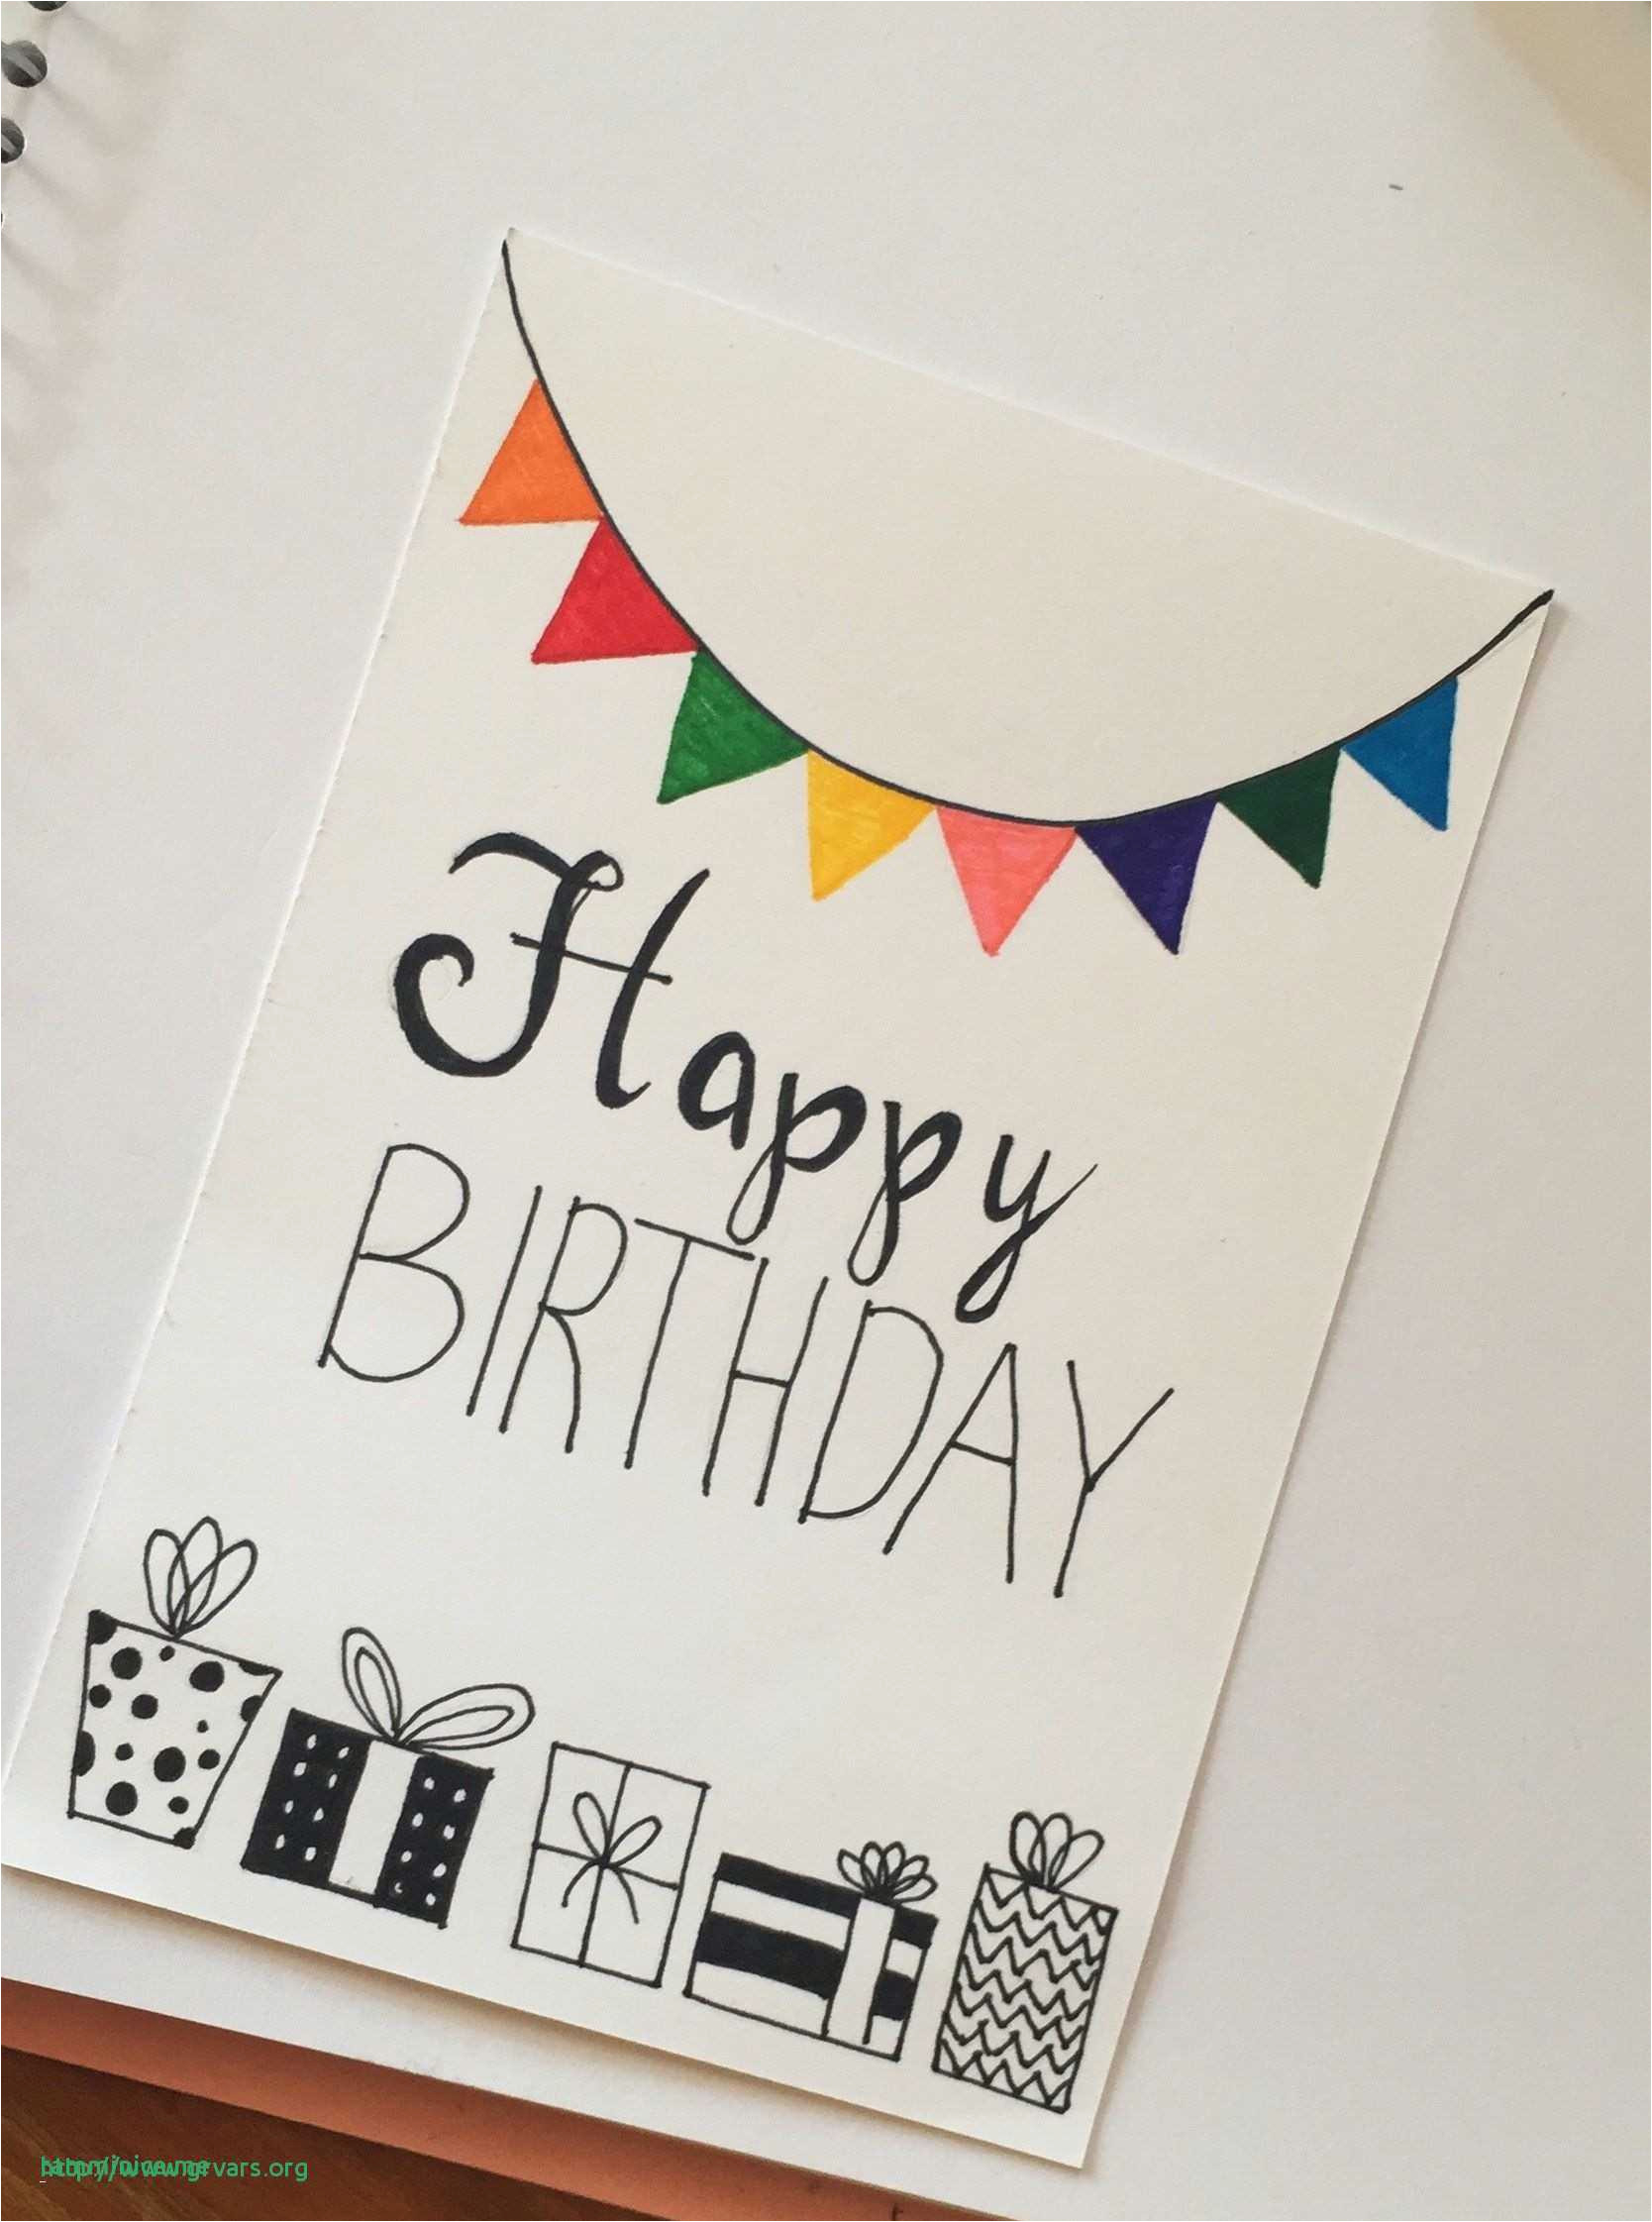 Good Ideas For Birthday Cards How To Make Diy Birthday Cards For Best Friend Simple Handmade